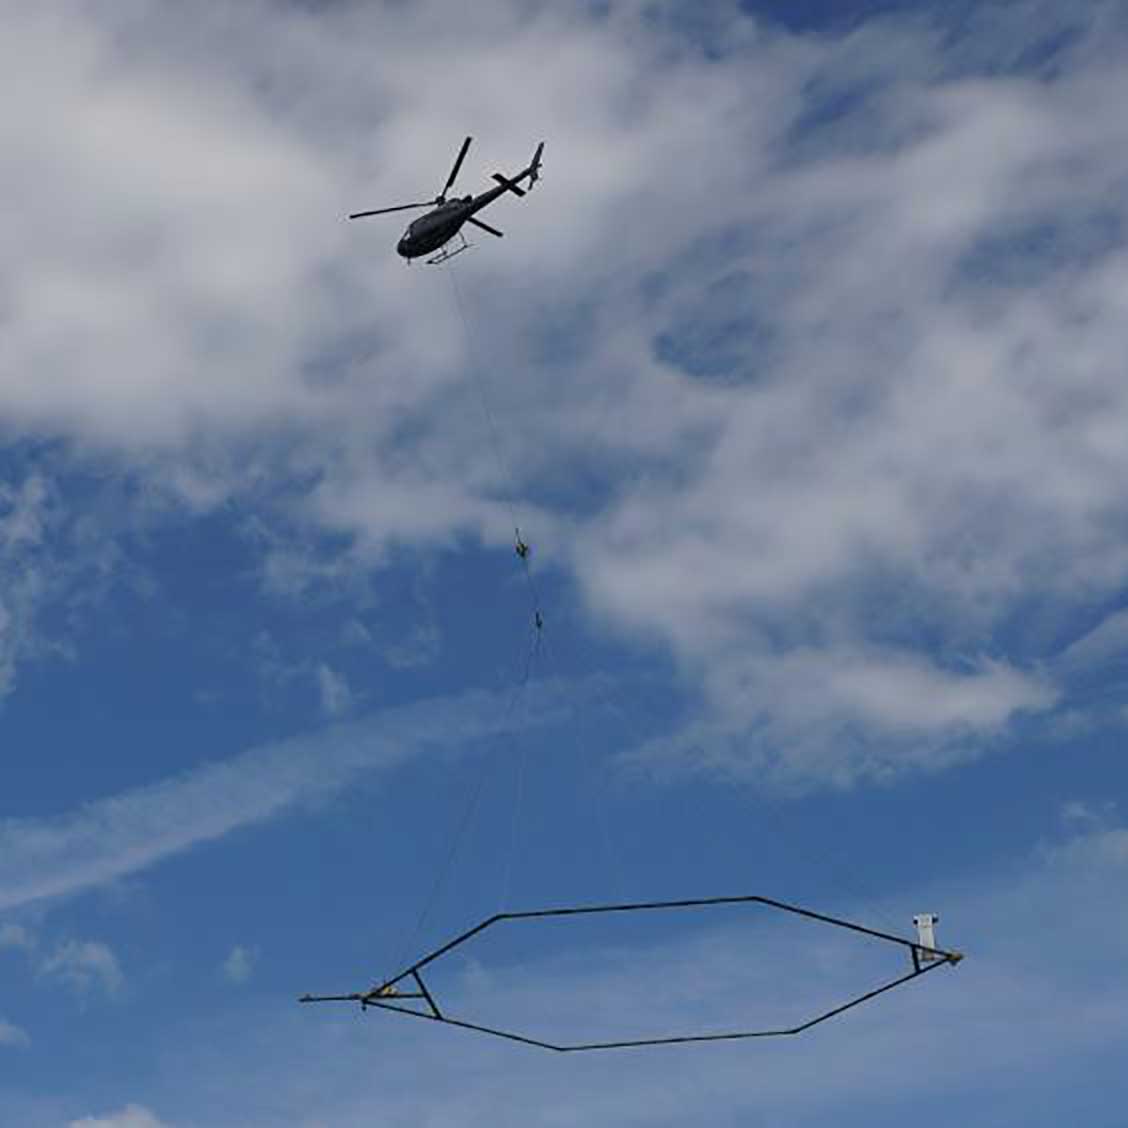 Figure 9. Helicopter towing a geophysical device as part of an electromagnetic and magnetic survey to collect TDEM data (USGS).